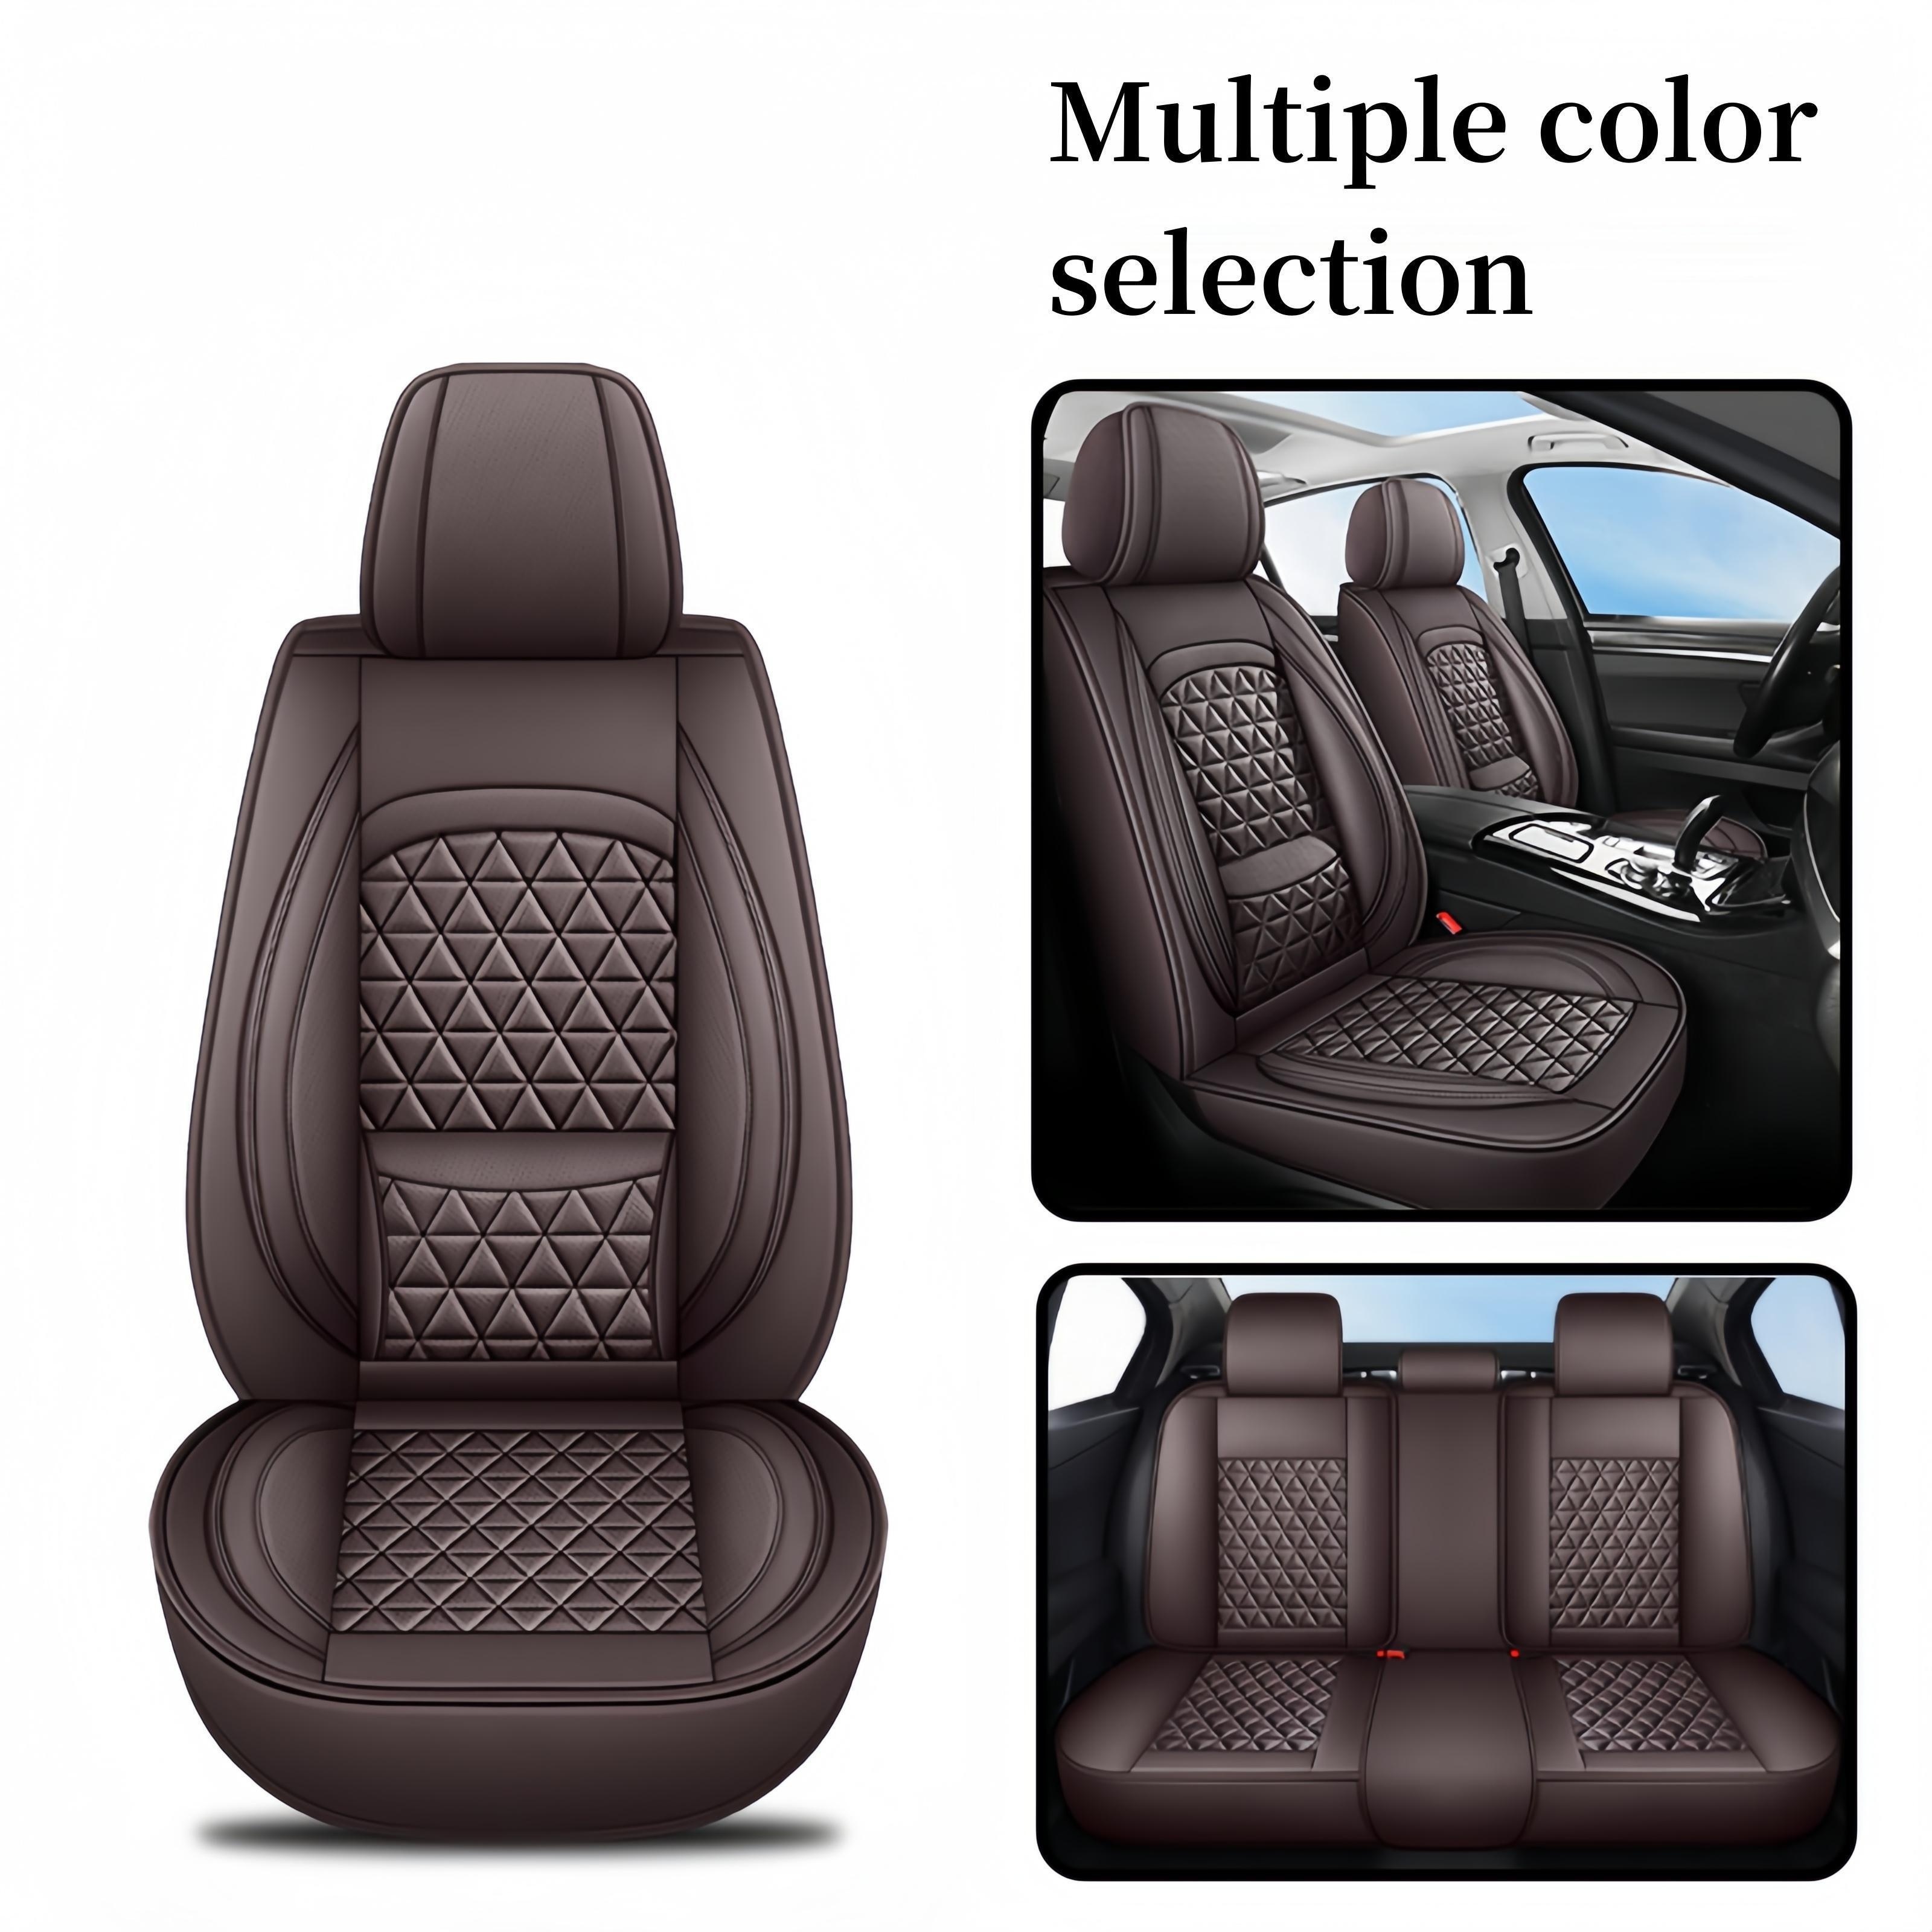 

5 Seats Car Full Coverage Premium Pu Leather Seat Protector Universal Car Seat Covers With Fixed Lumbar Support